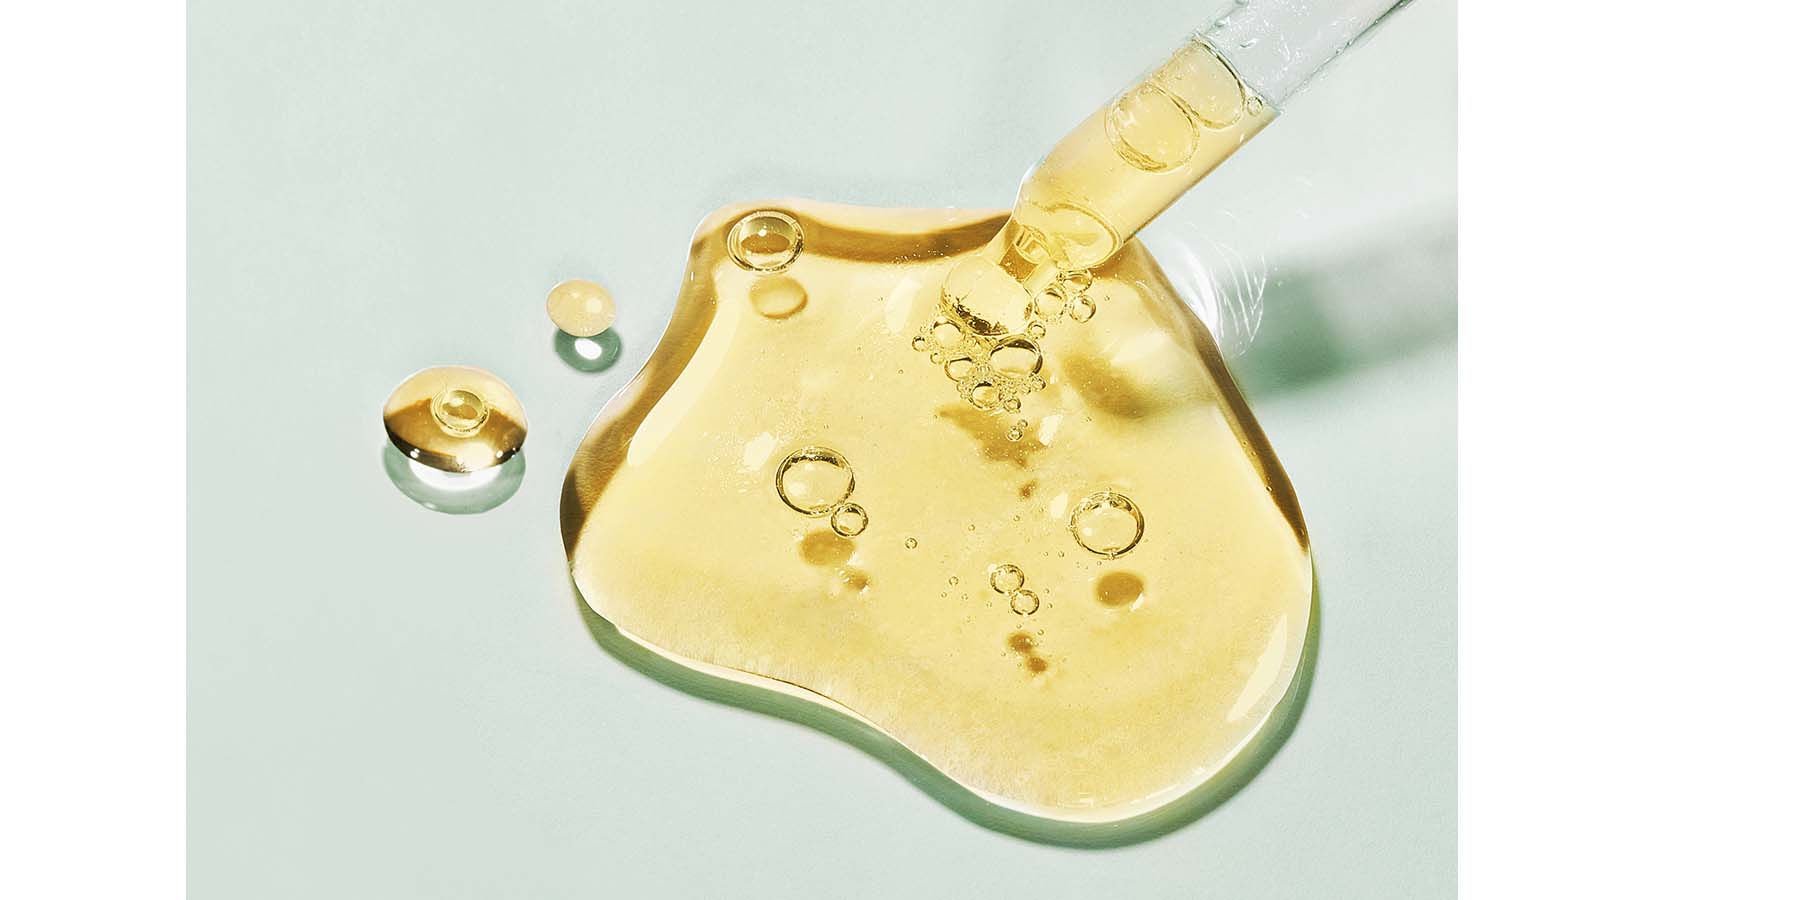 How (and why) to use a facial oil in your routine